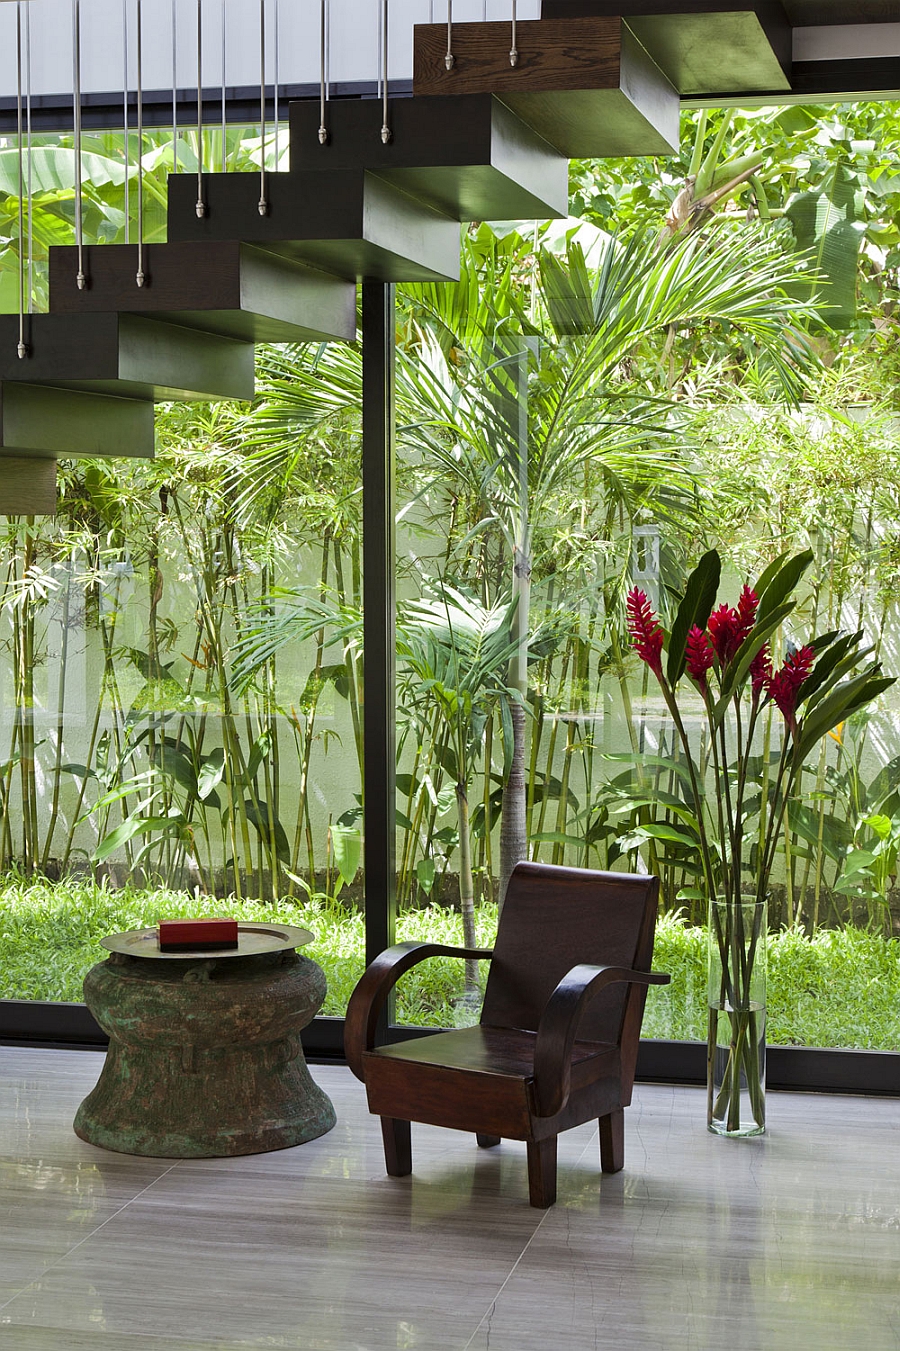 Natural greenery outside becomes a part of the indoors